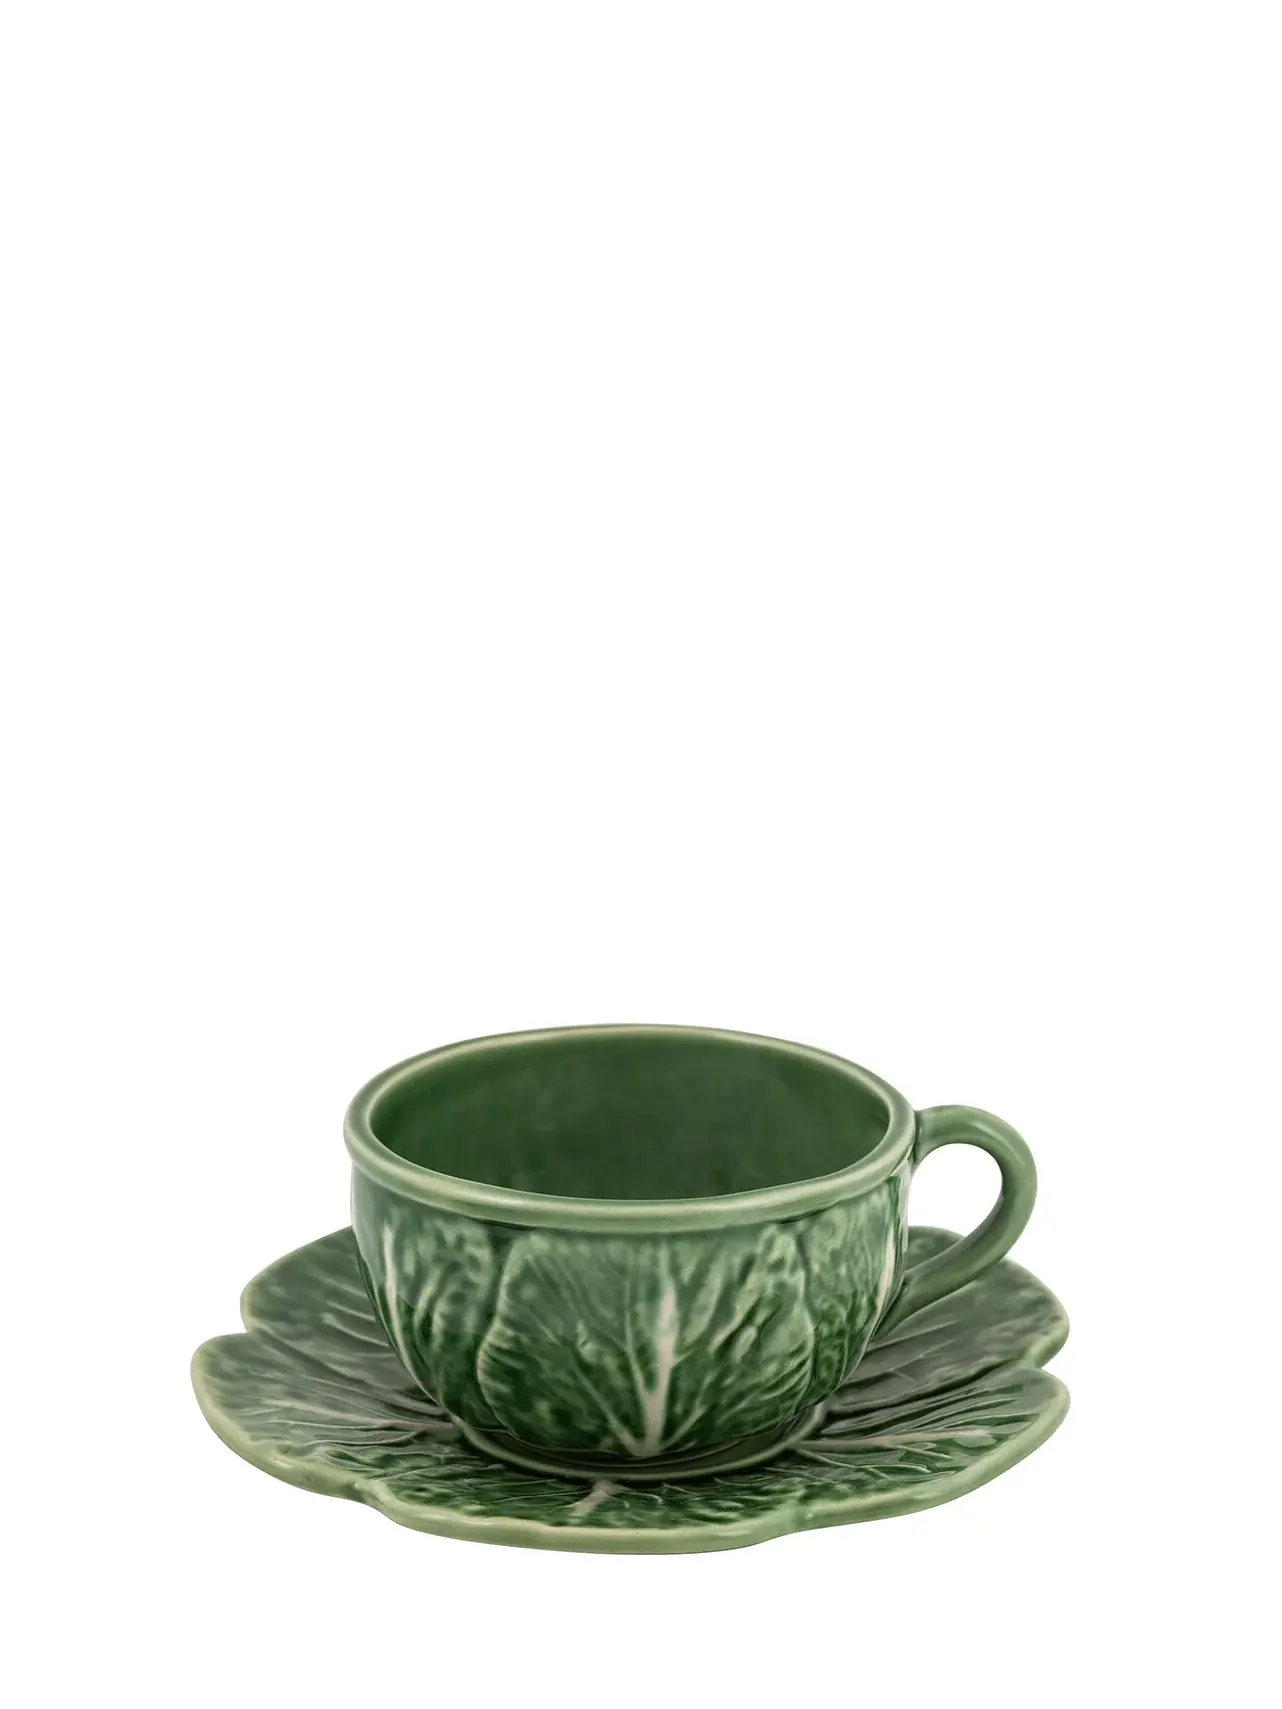 Cabbage Tea cup and saucer, green